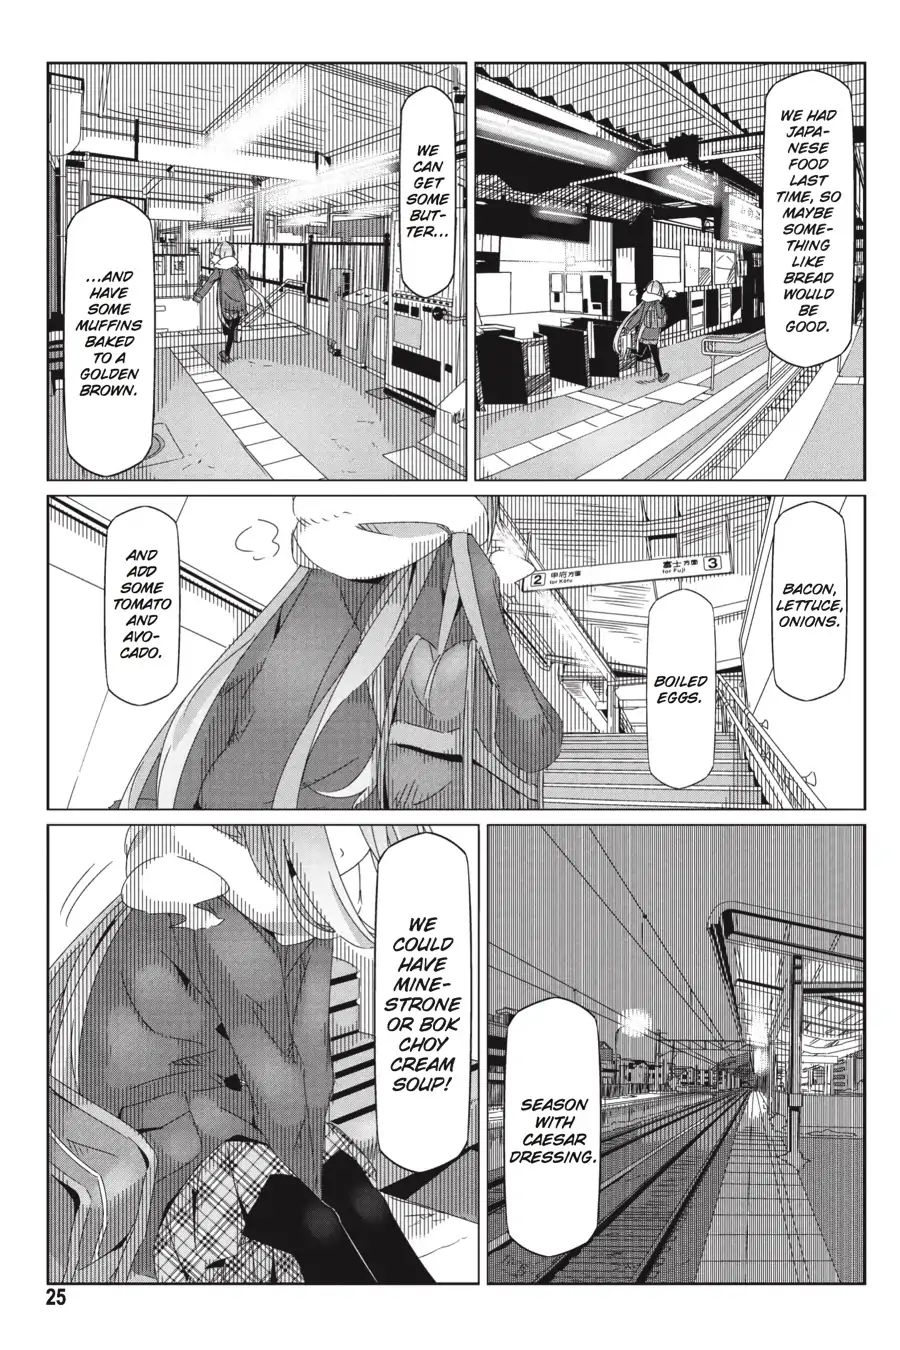 Yurucamp Vol.6 Chapter 29: What Will You Buy with the Money from Your Job?